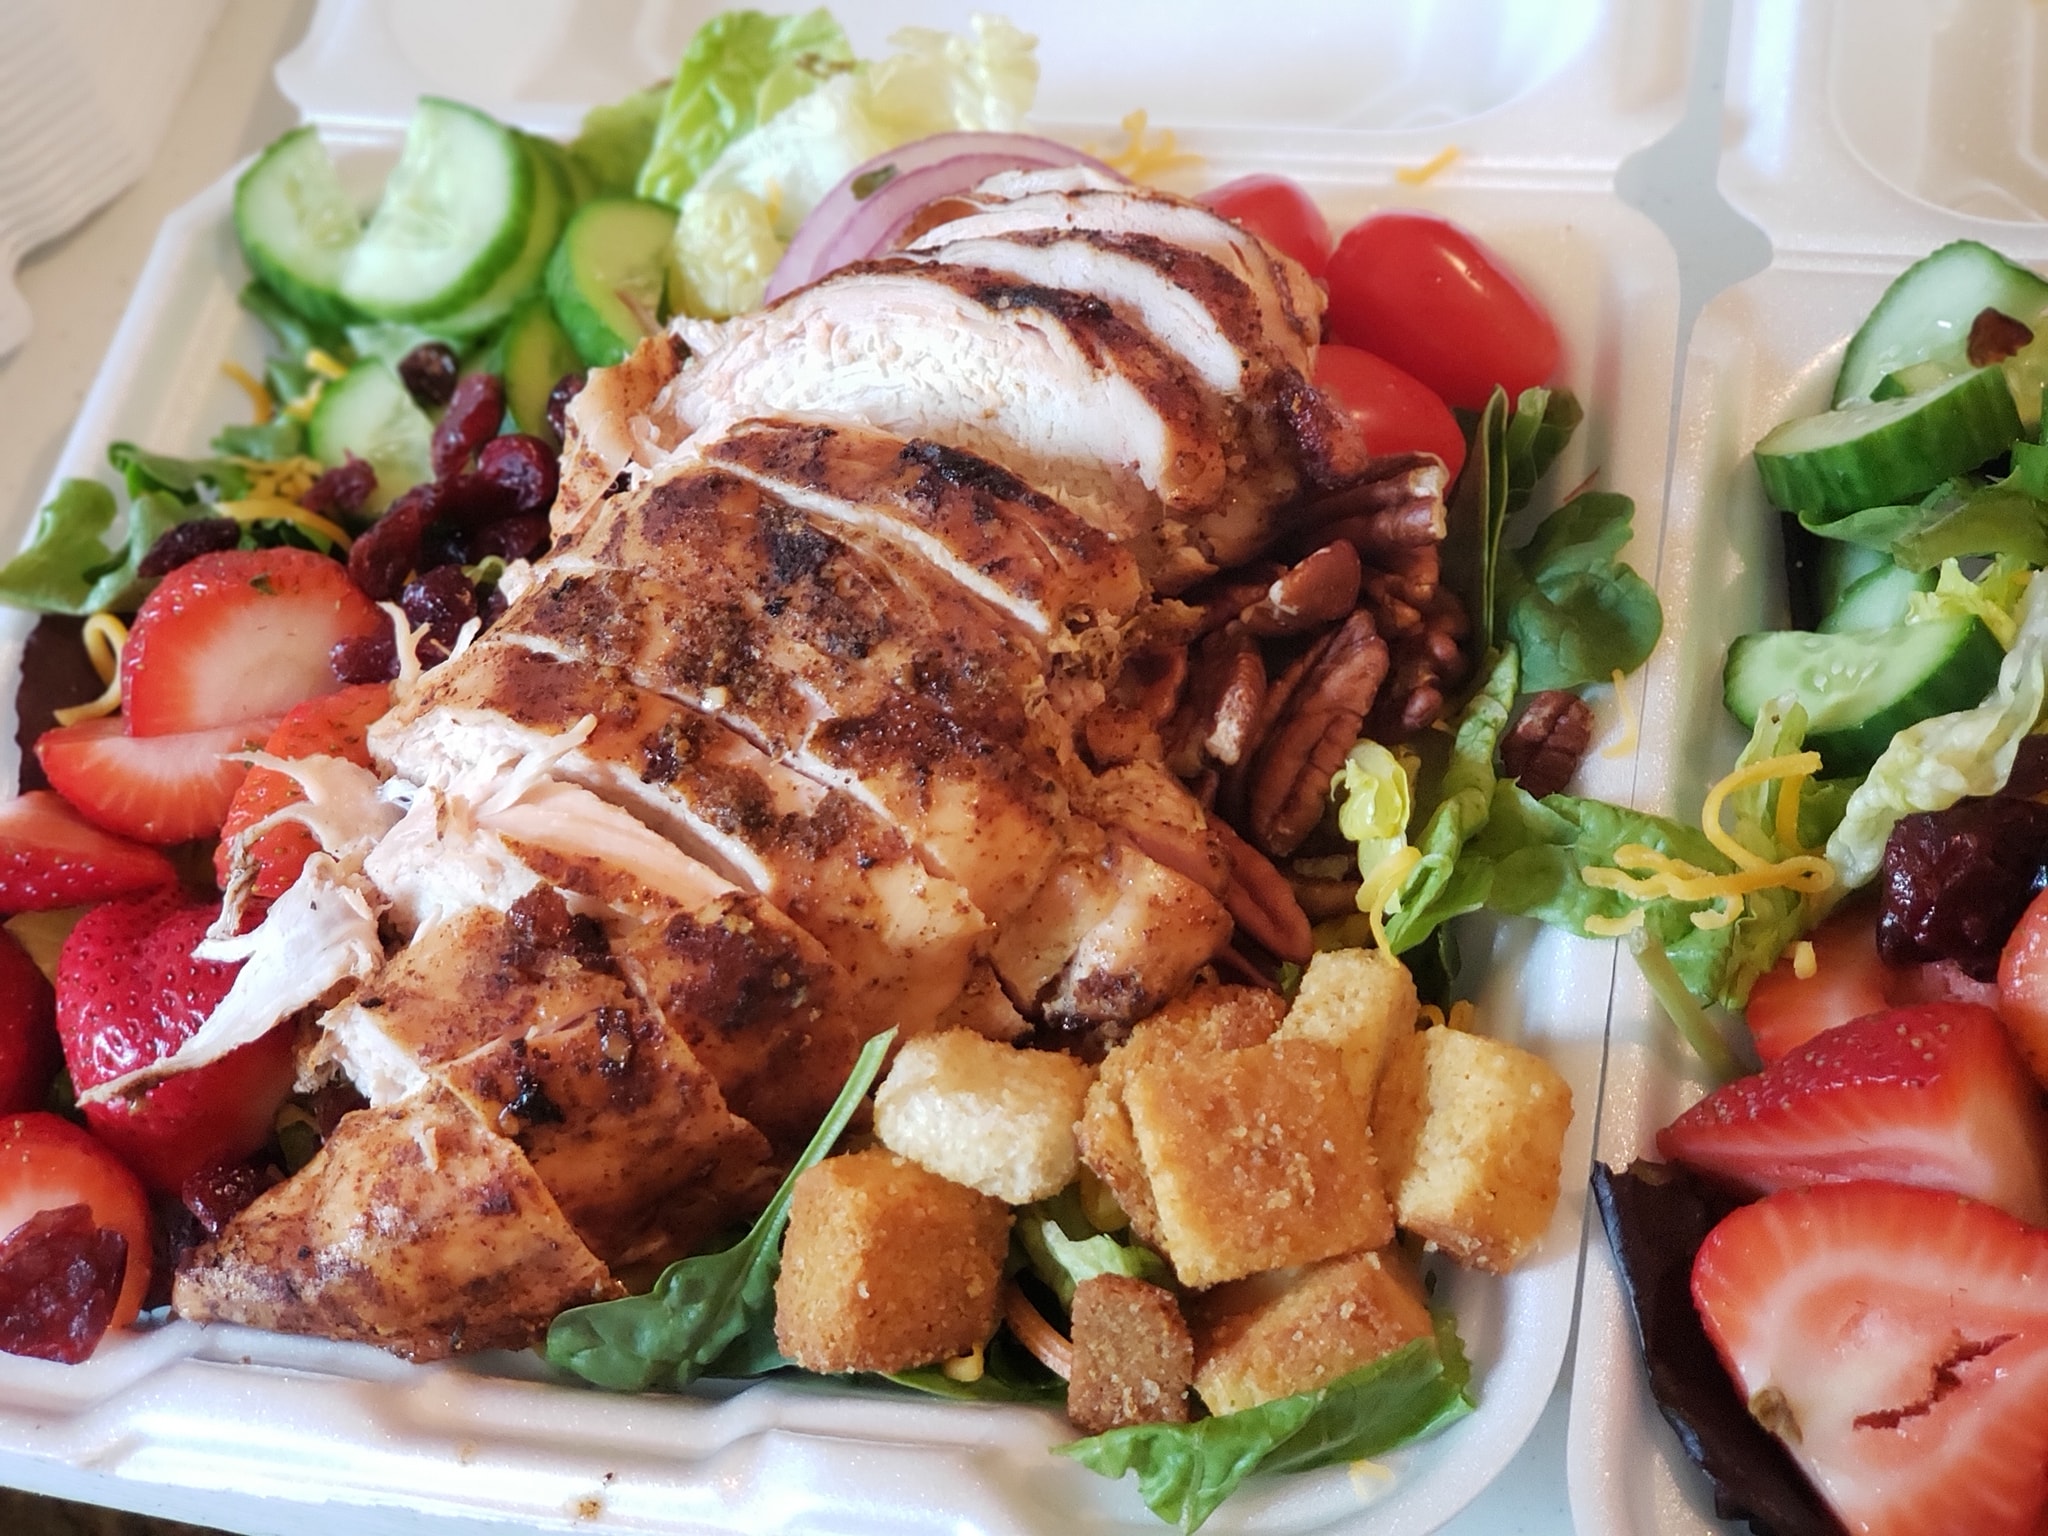 A huge smoked chicken breast is on top of a salad in a styrofoam container with strawberries, almonds, croutons, and cucumbers. Photo from Dis N' Dat BBQ Facebook page.